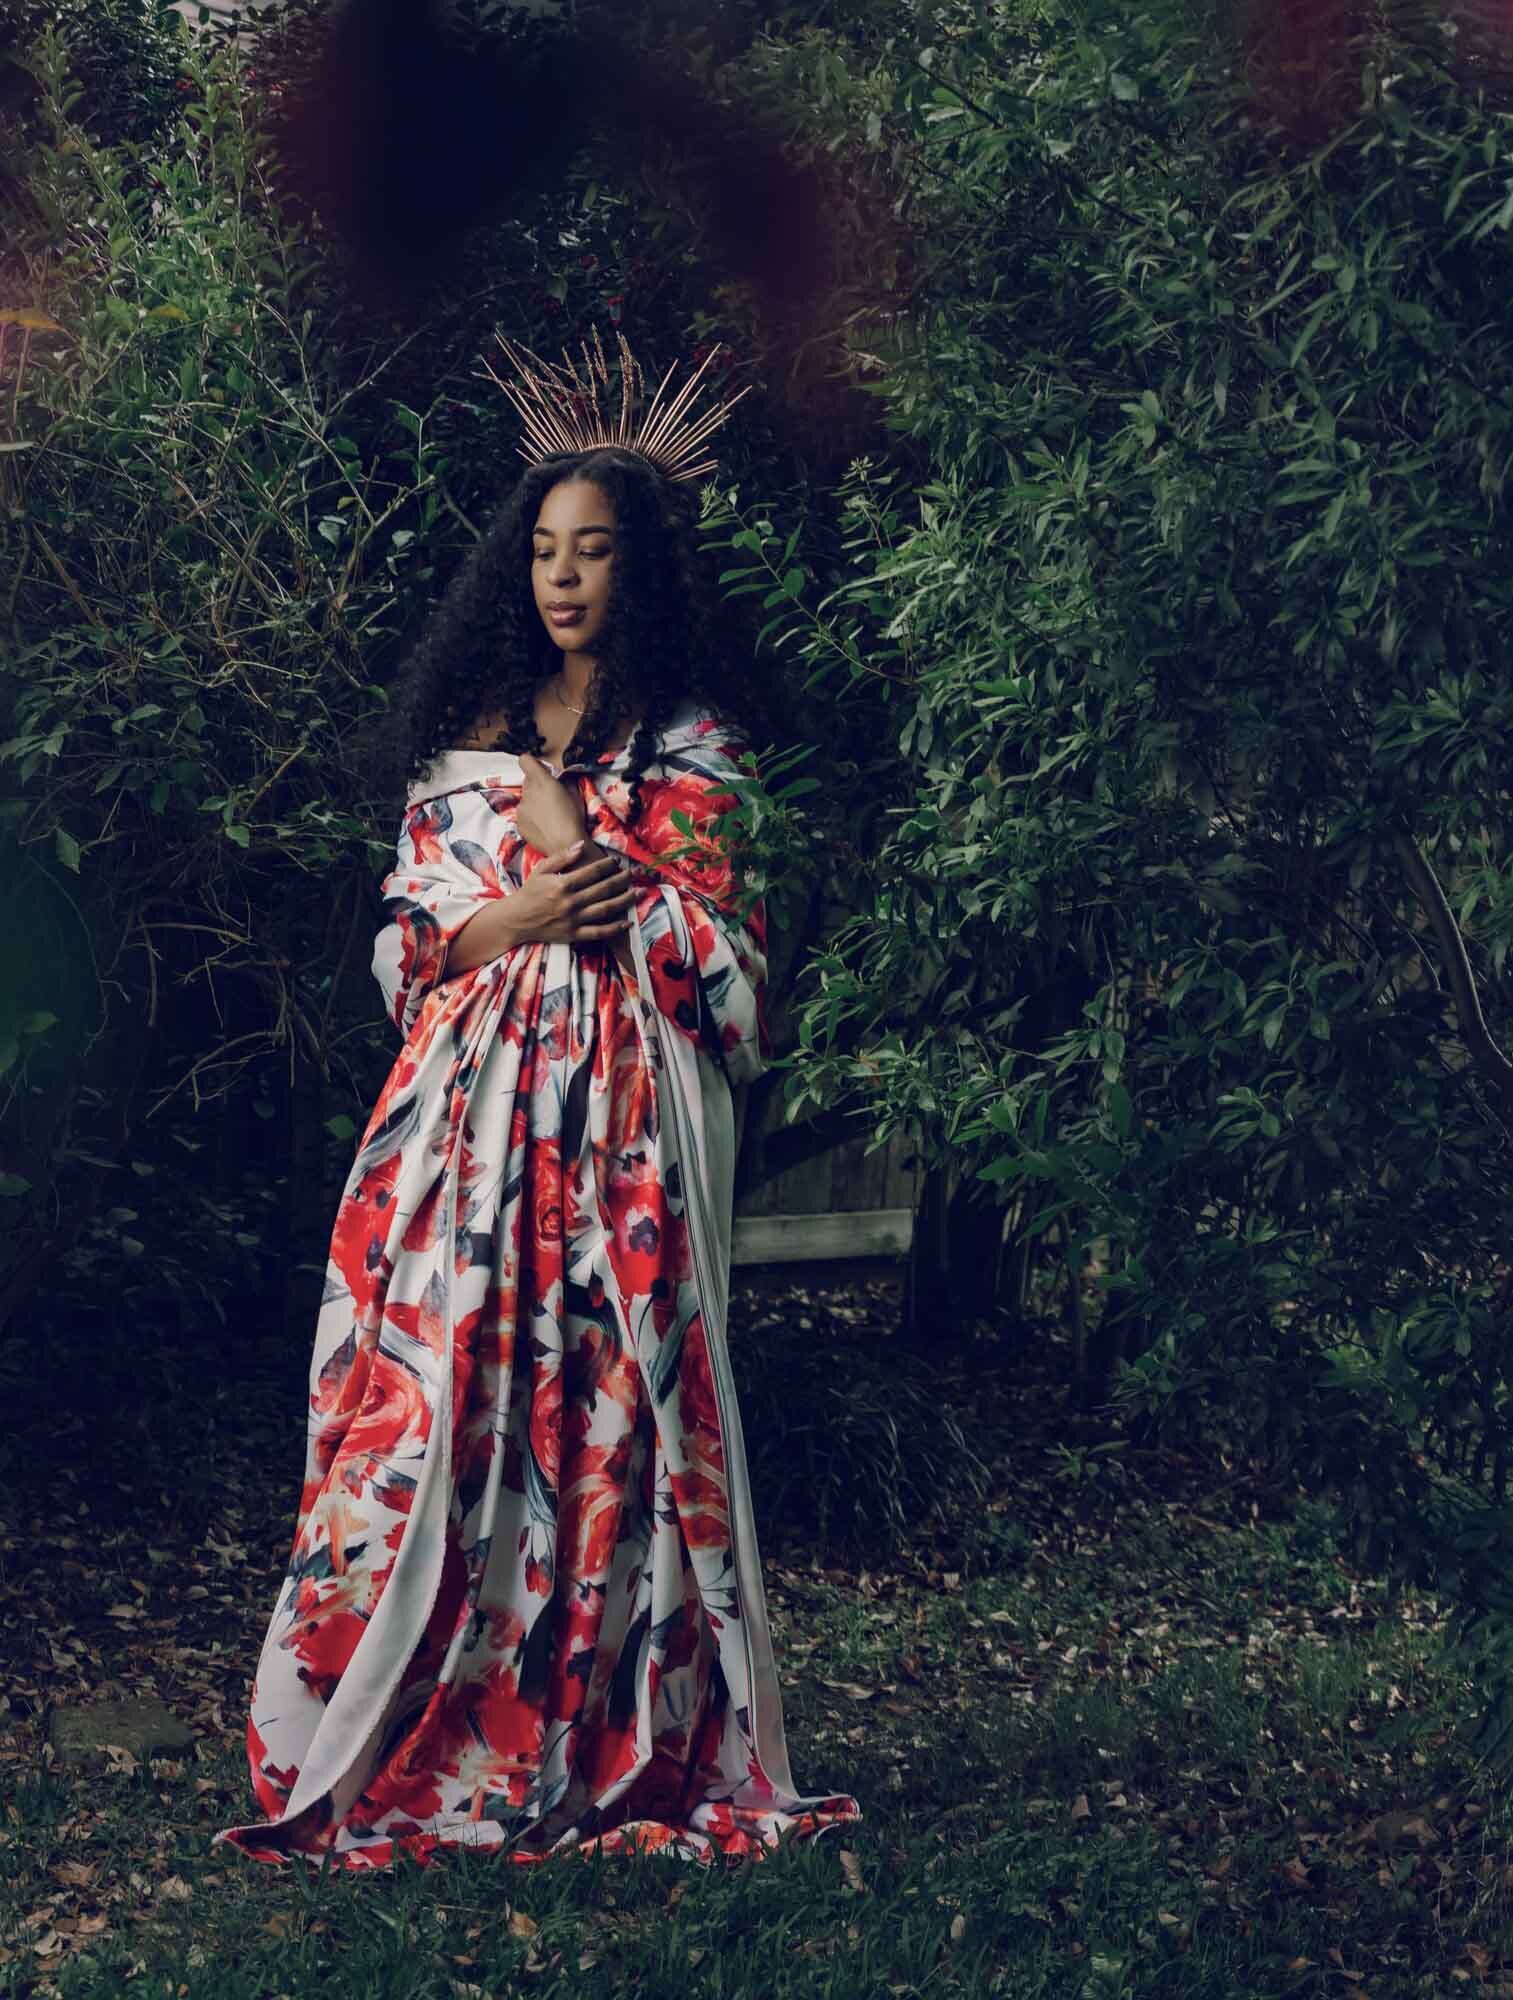 Darkly lit portrait of a woman in a floral dress, standing in front of trees, looking camera left. Houston's premier portraits.